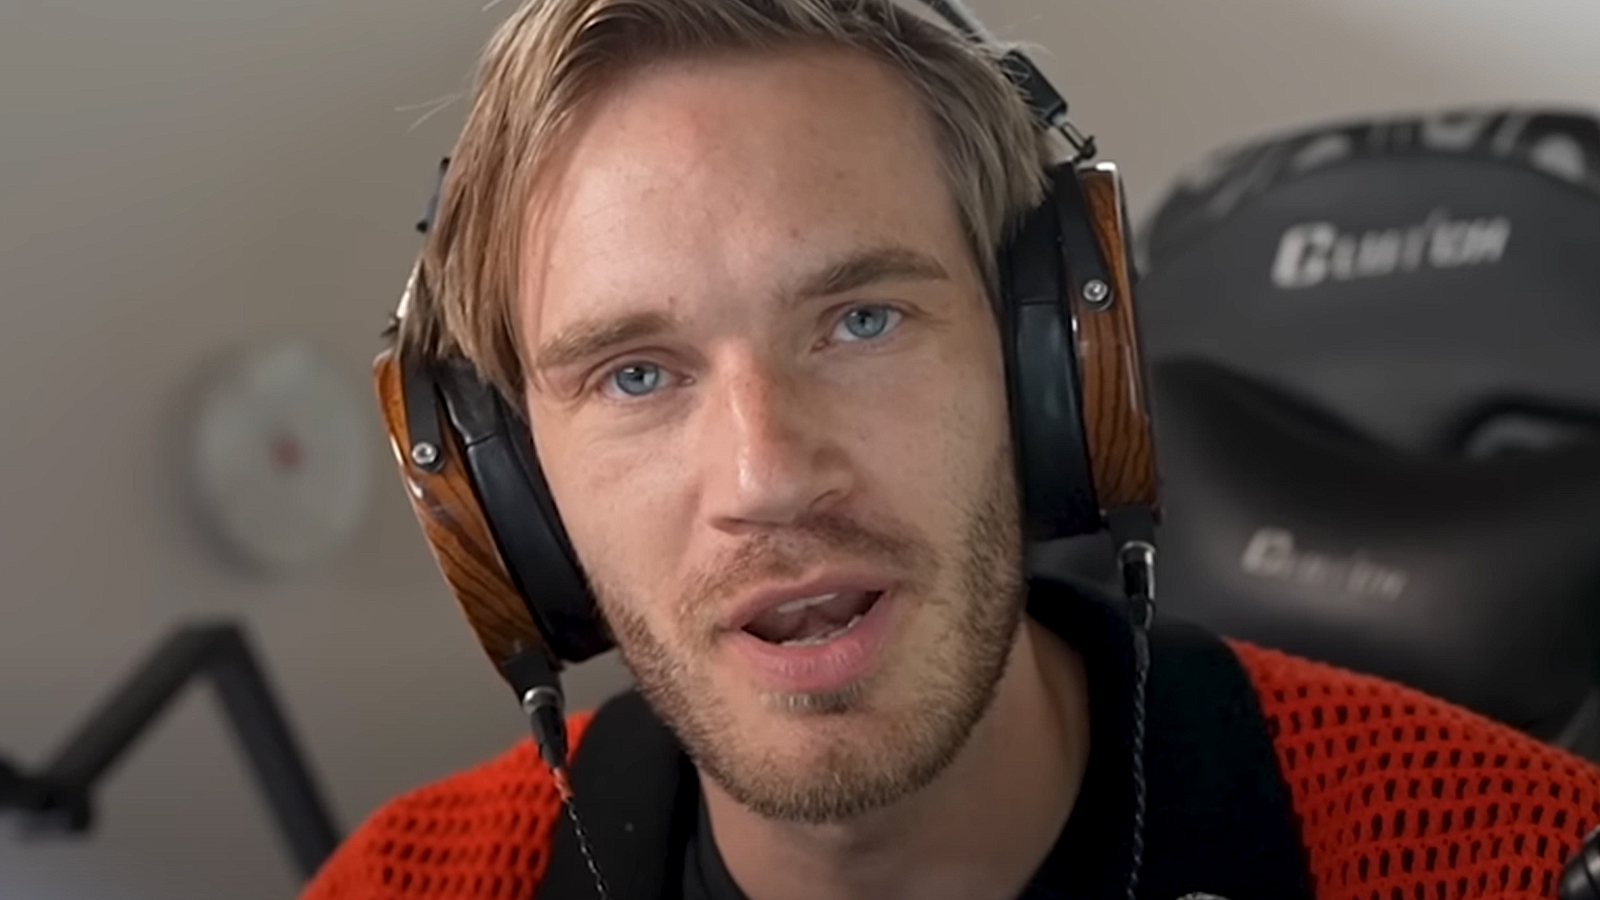 PewDiePie calls out influencers for 